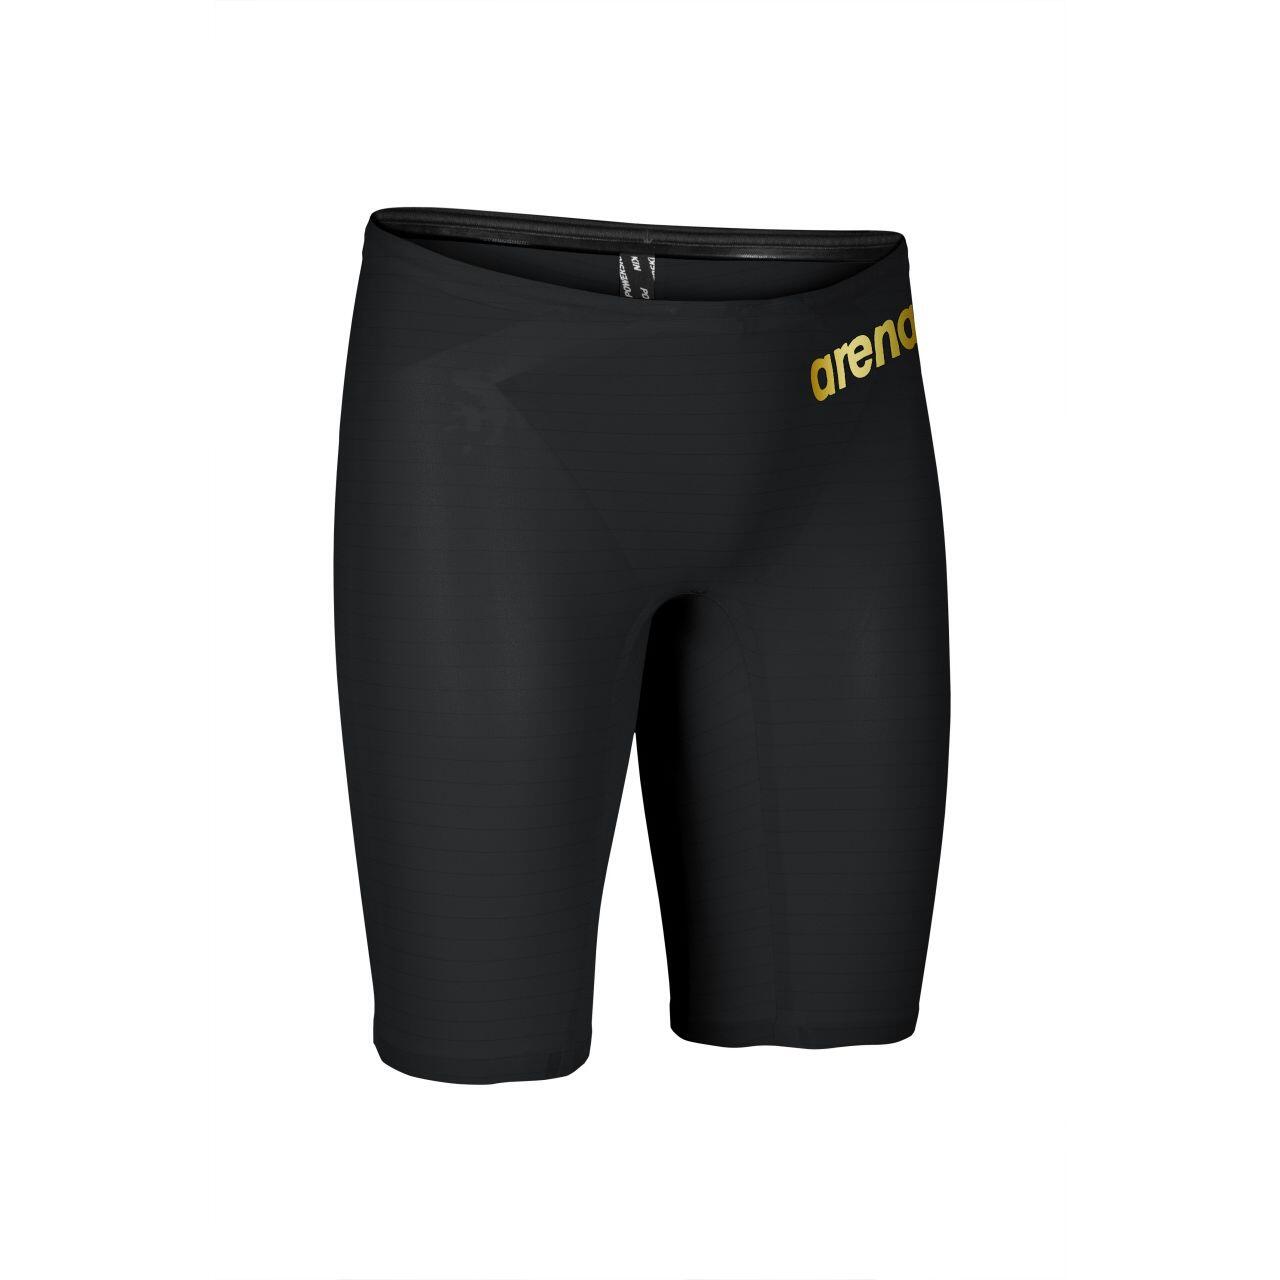 Arena Powerskin Carbon Air 2 Jammer - Black and Gold 3/5